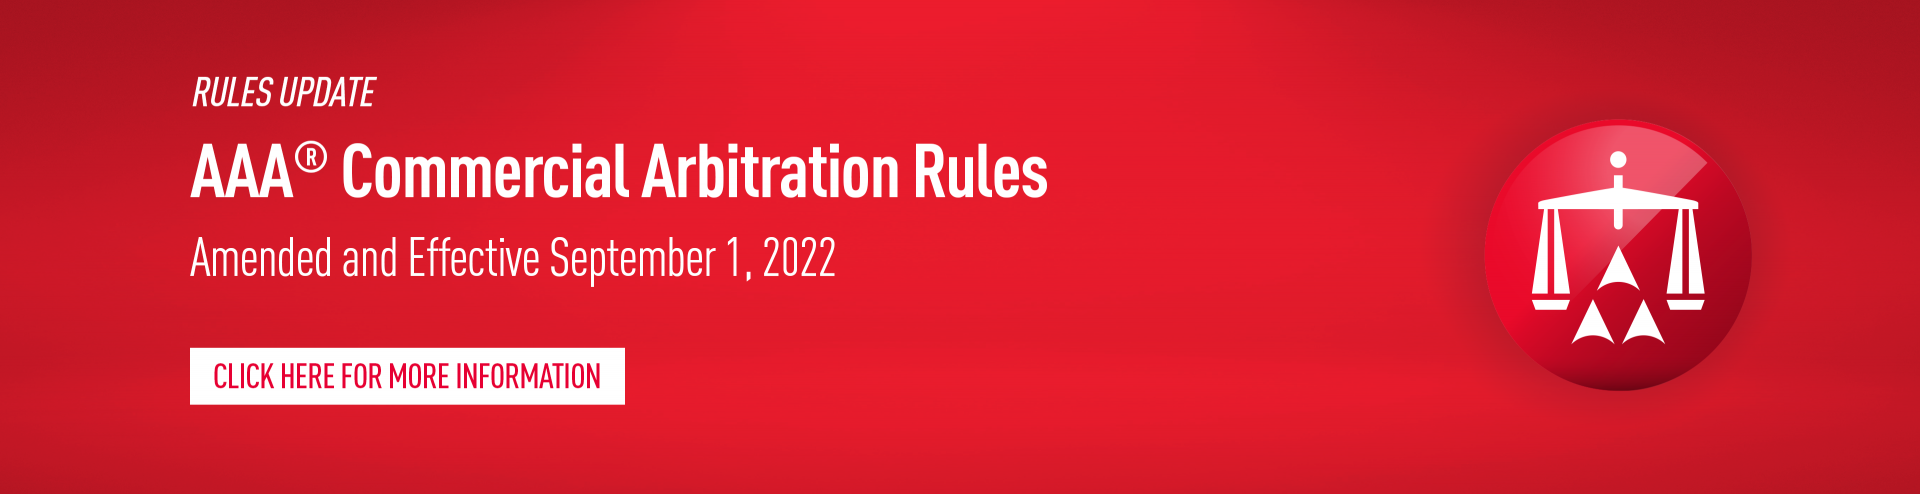 Rules Update AAA Commercial Arbitration Rules